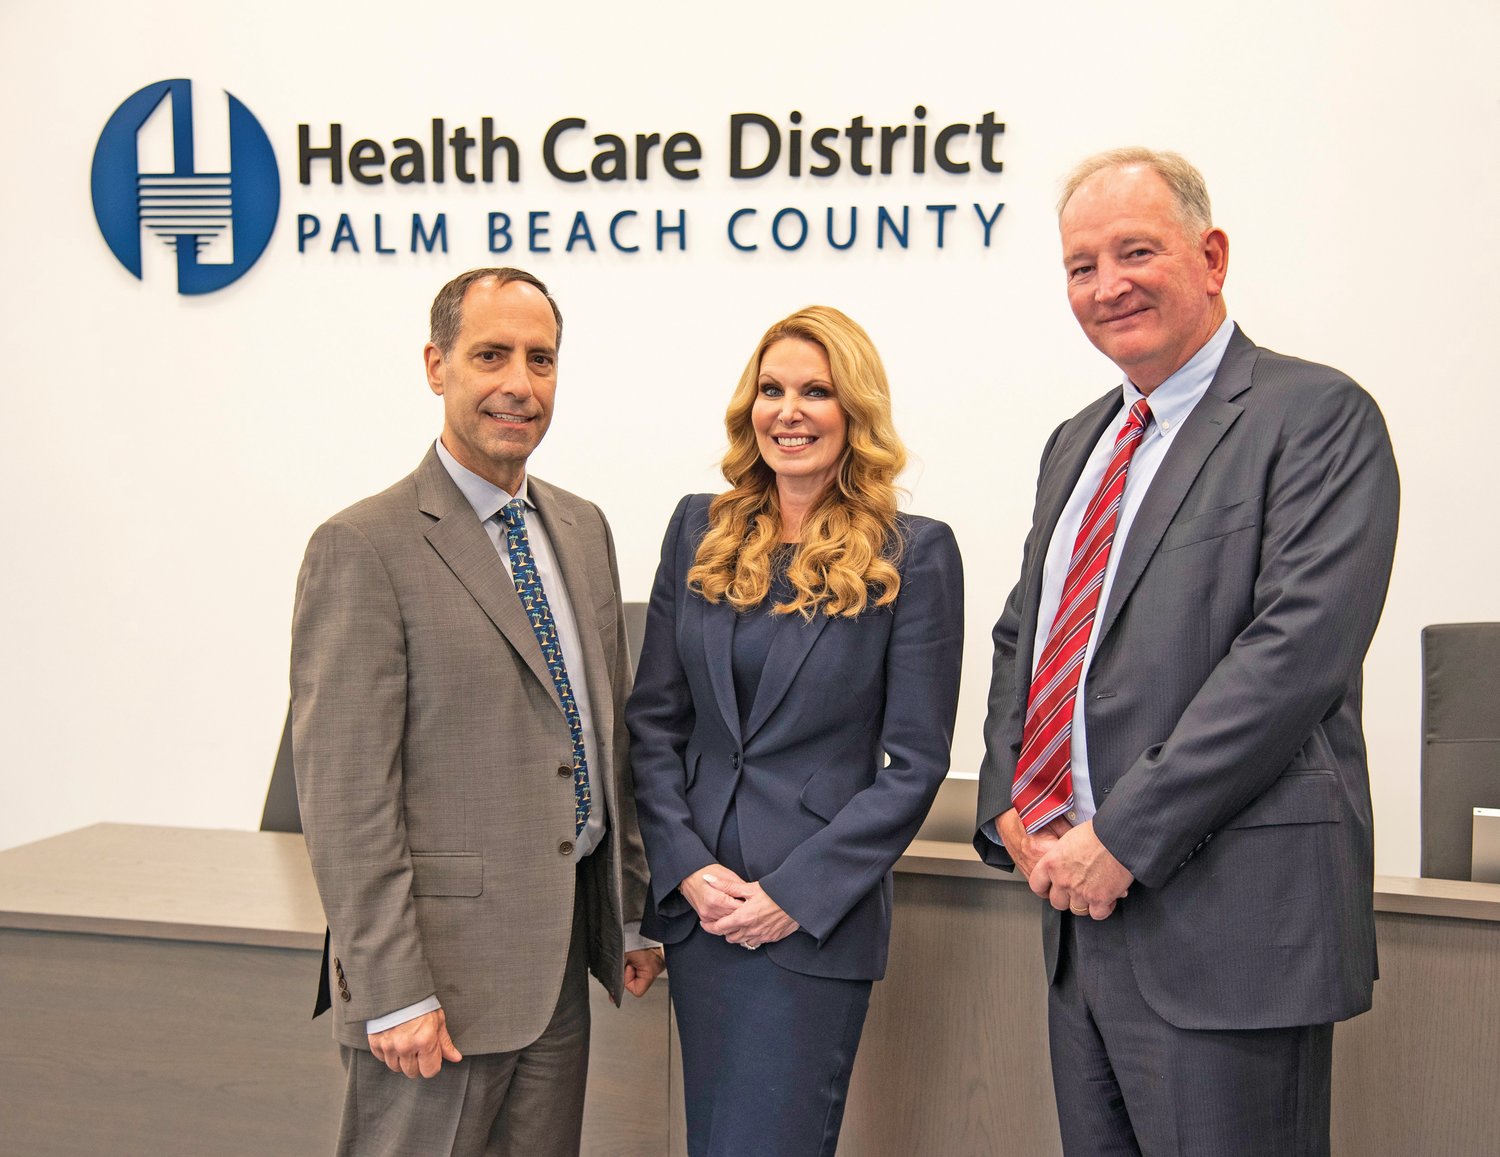 Three new board members of the Health Care District of Palm Beach County from left to right: Carlos Vidueira, Chair; Tracy Caruso and Patrick Rooney